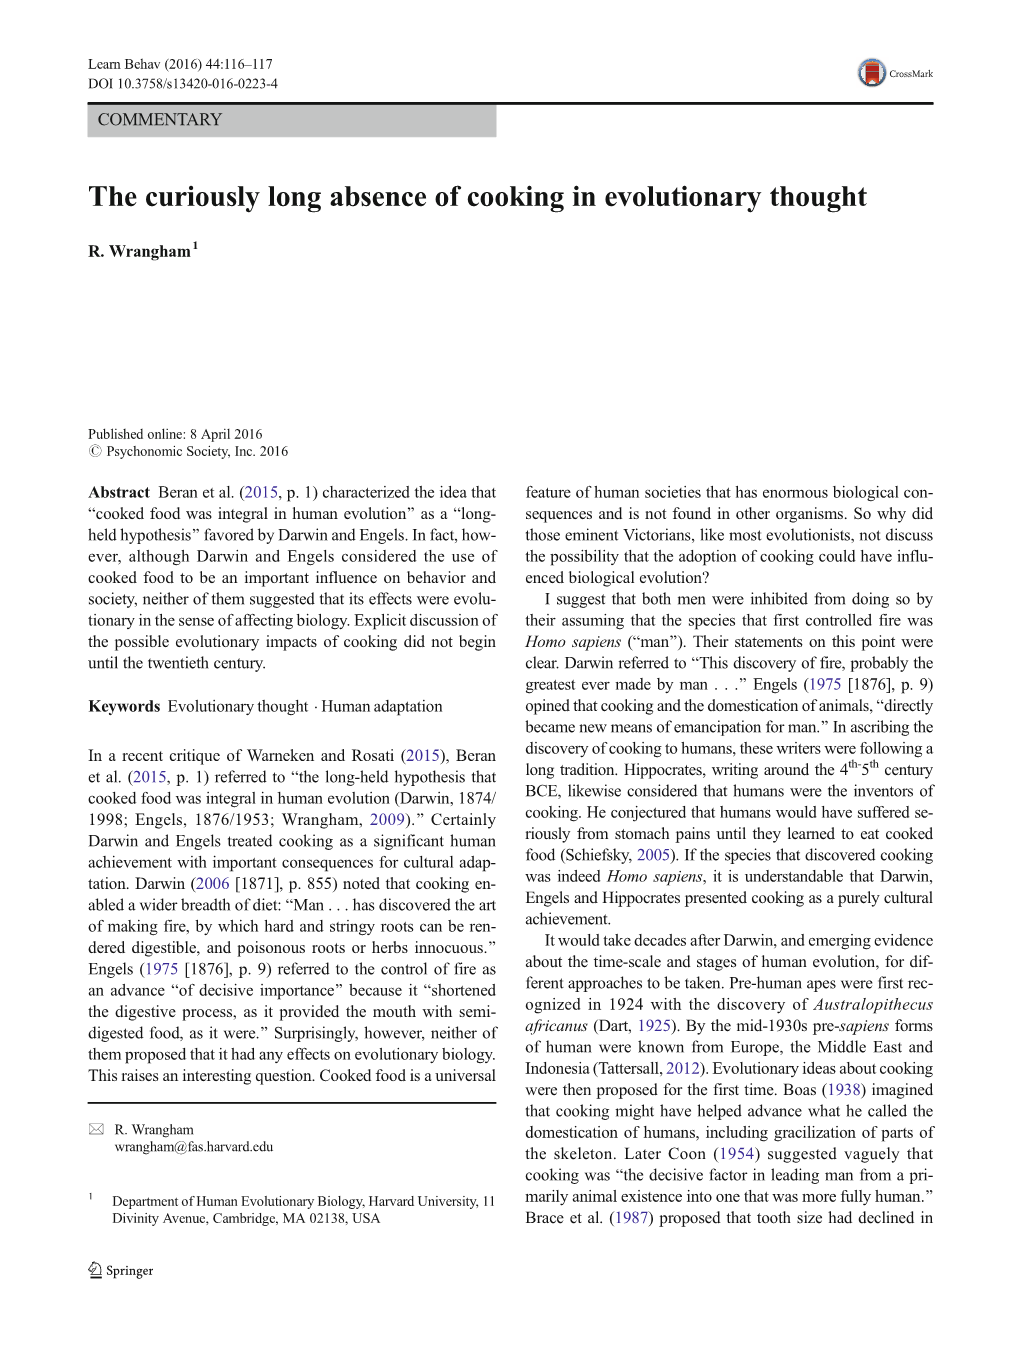 The Curiously Long Absence of Cooking in Evolutionary Thought